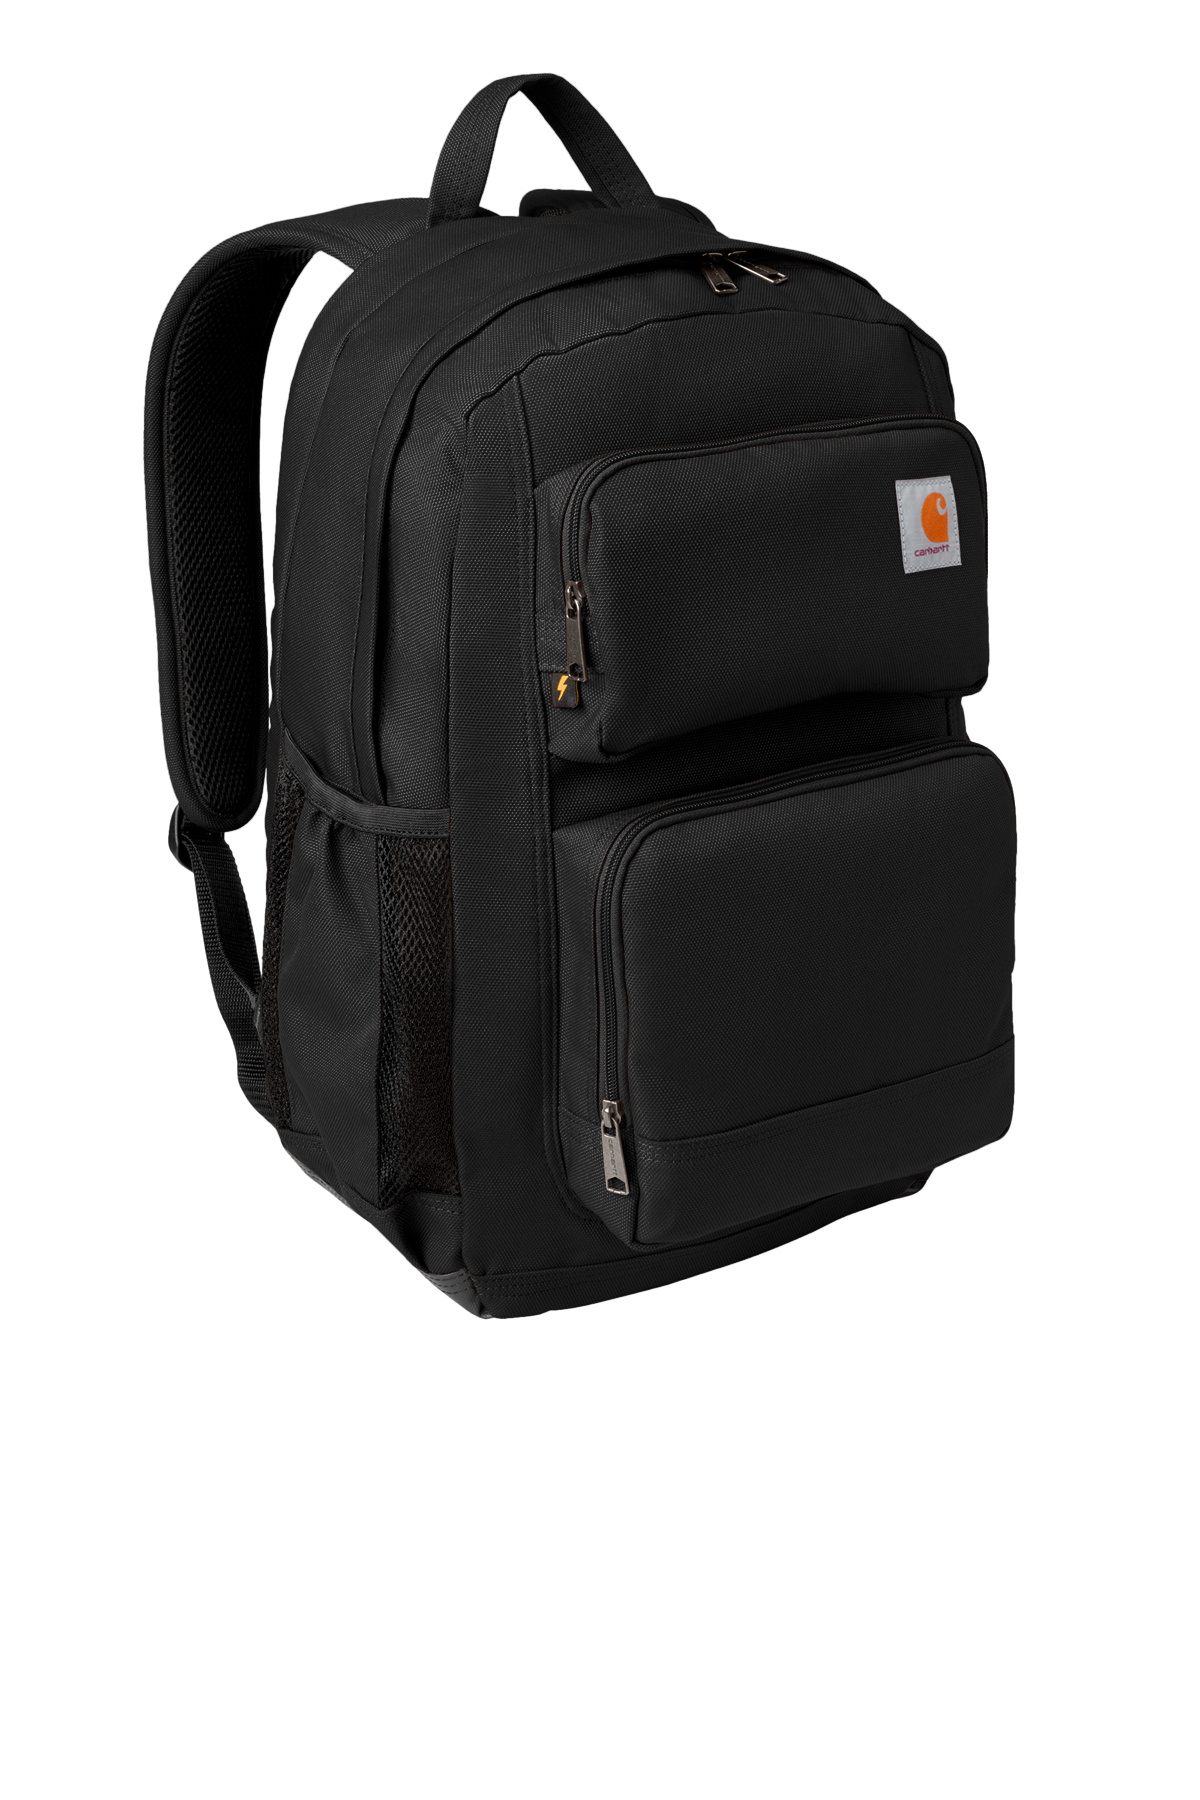 Carhartt 28L Foundry Series Dual-Compartment Backpack | Product | SanMar